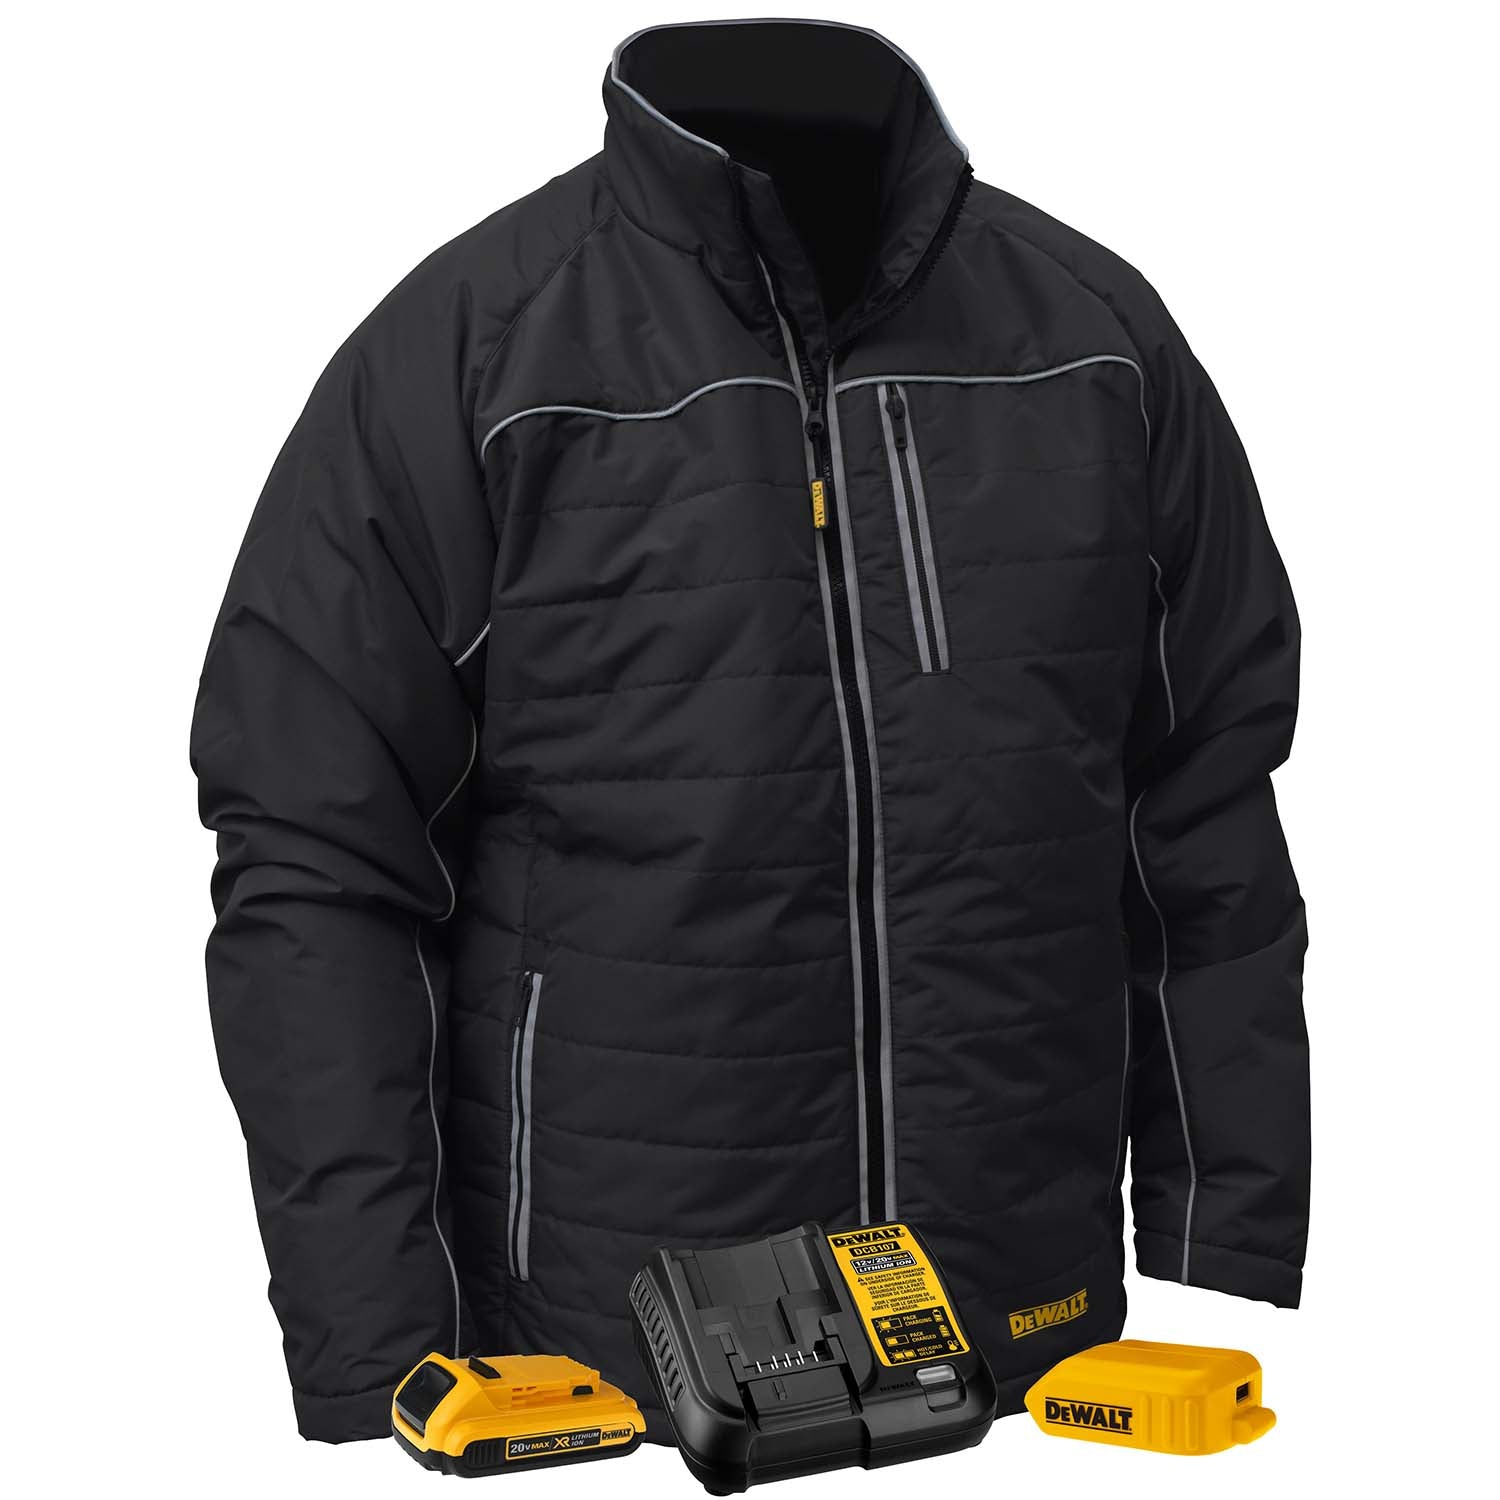 DEWALT Men's Heated Quilted Soft Shell Jacket Kitted